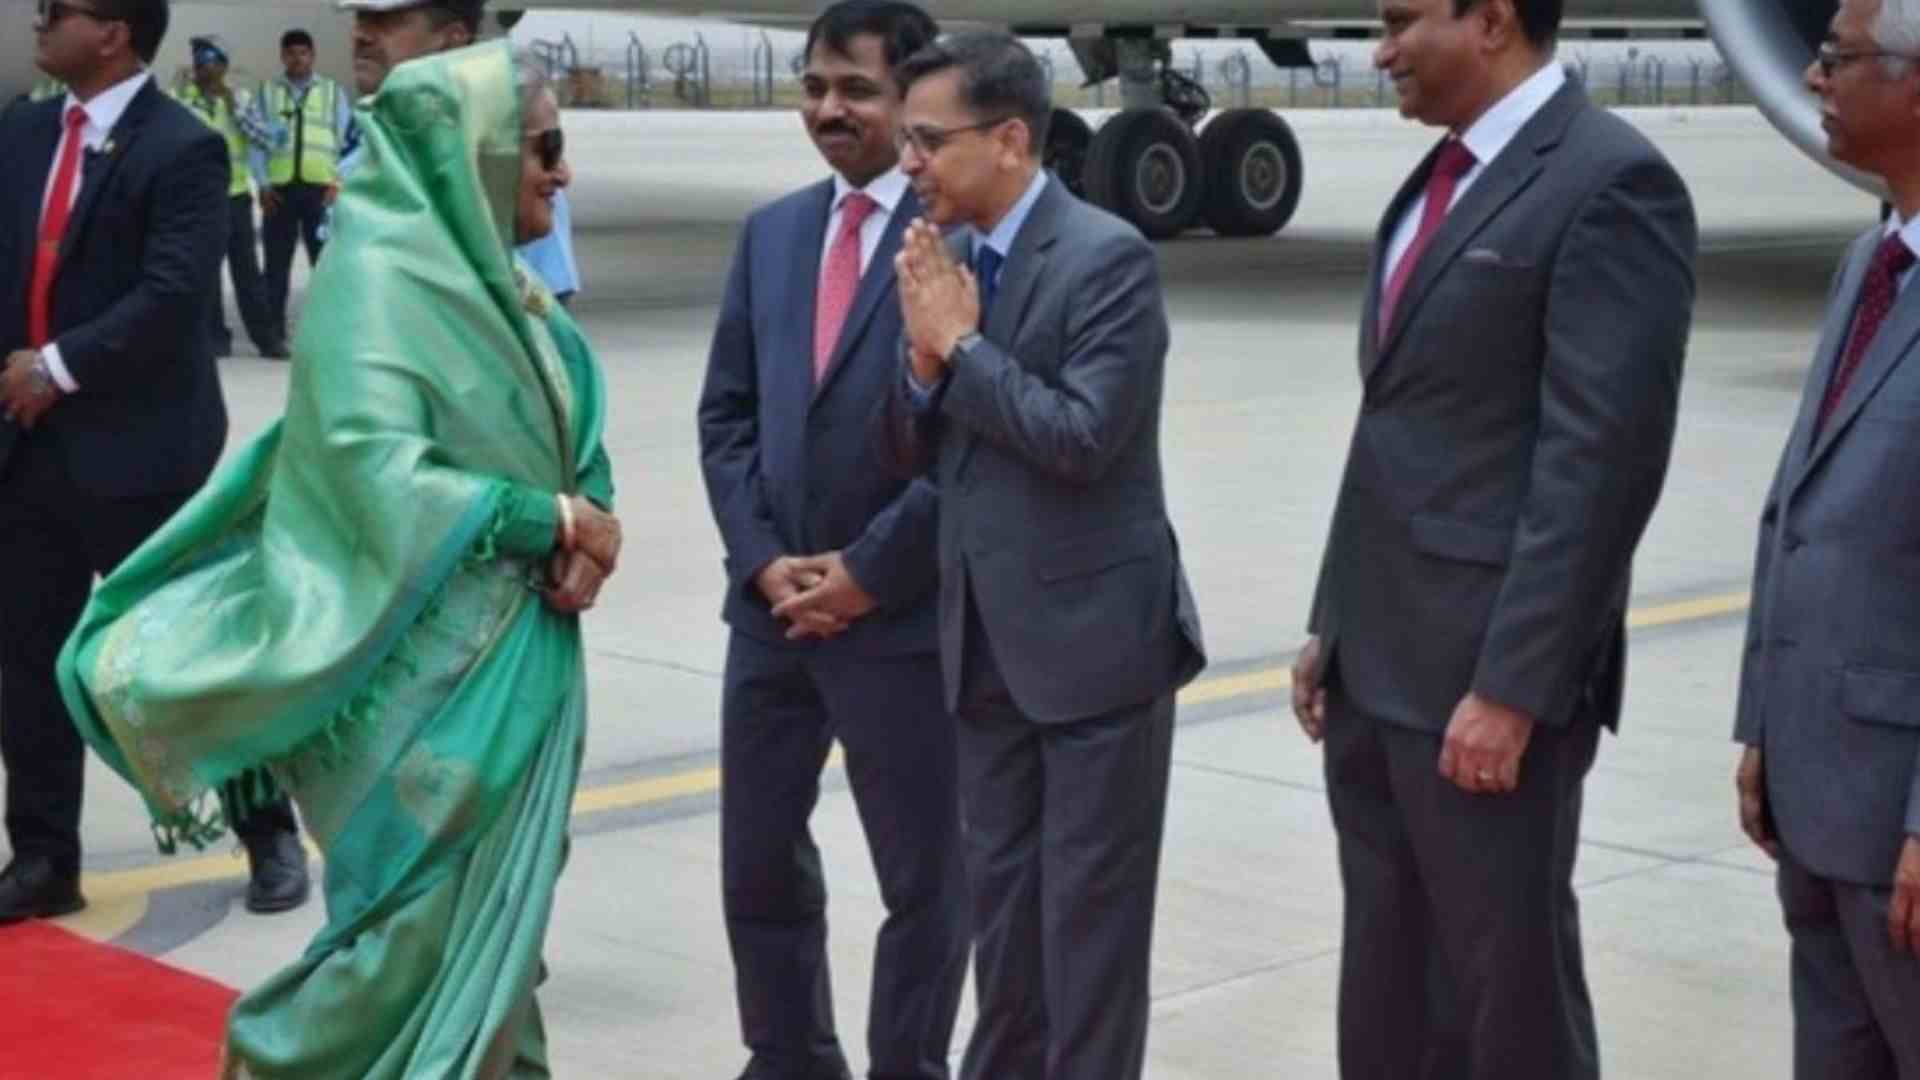 Bangladesh PM Sheikh Hasina Arrives In India Ahead Of Modi’s Swearing-In Ceremony